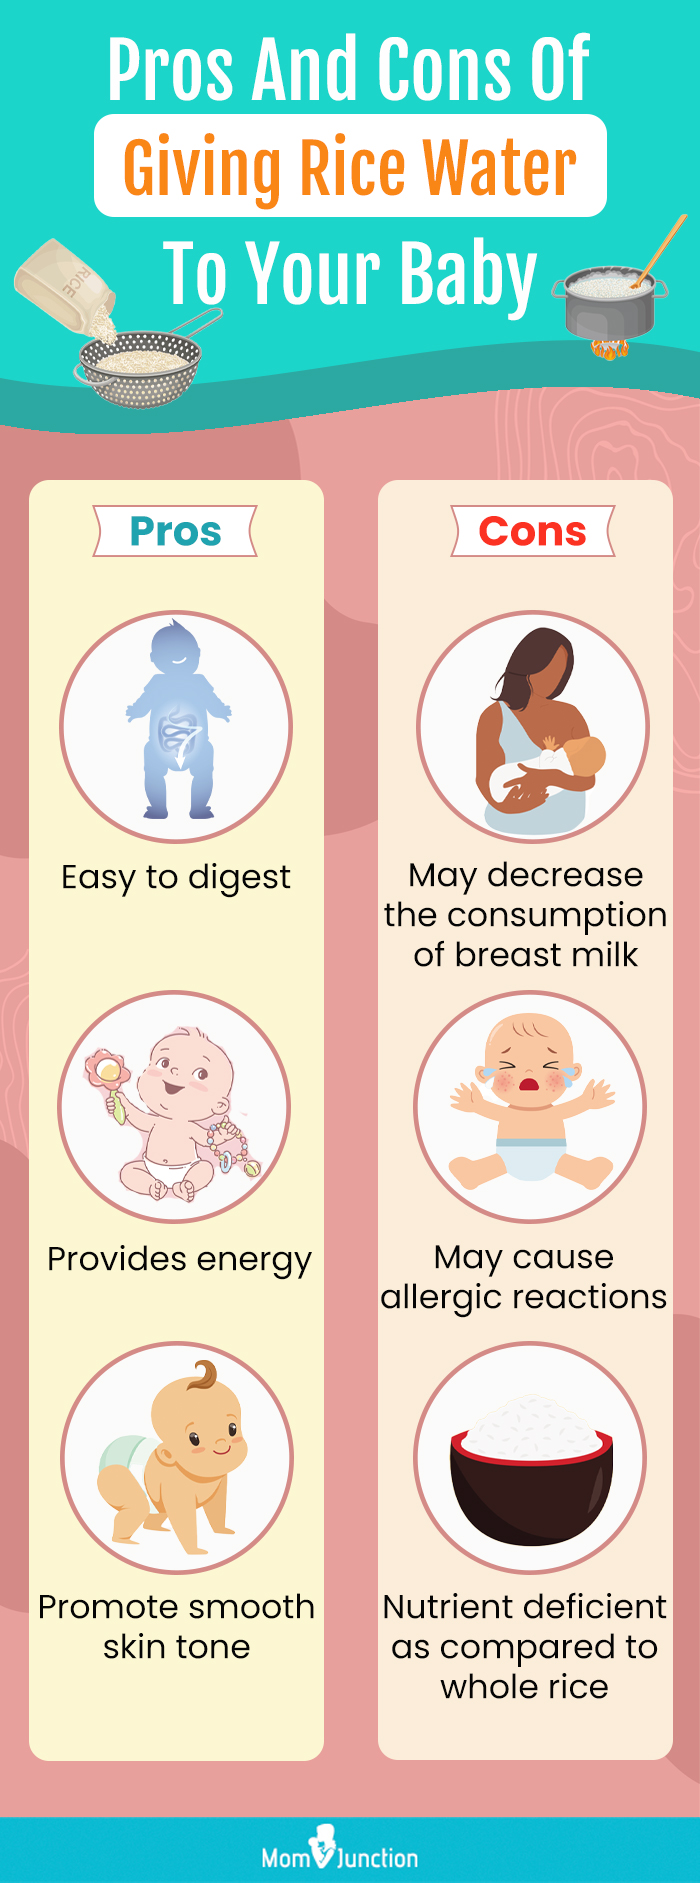 pros and cons of giving rice water to your baby (infographic)